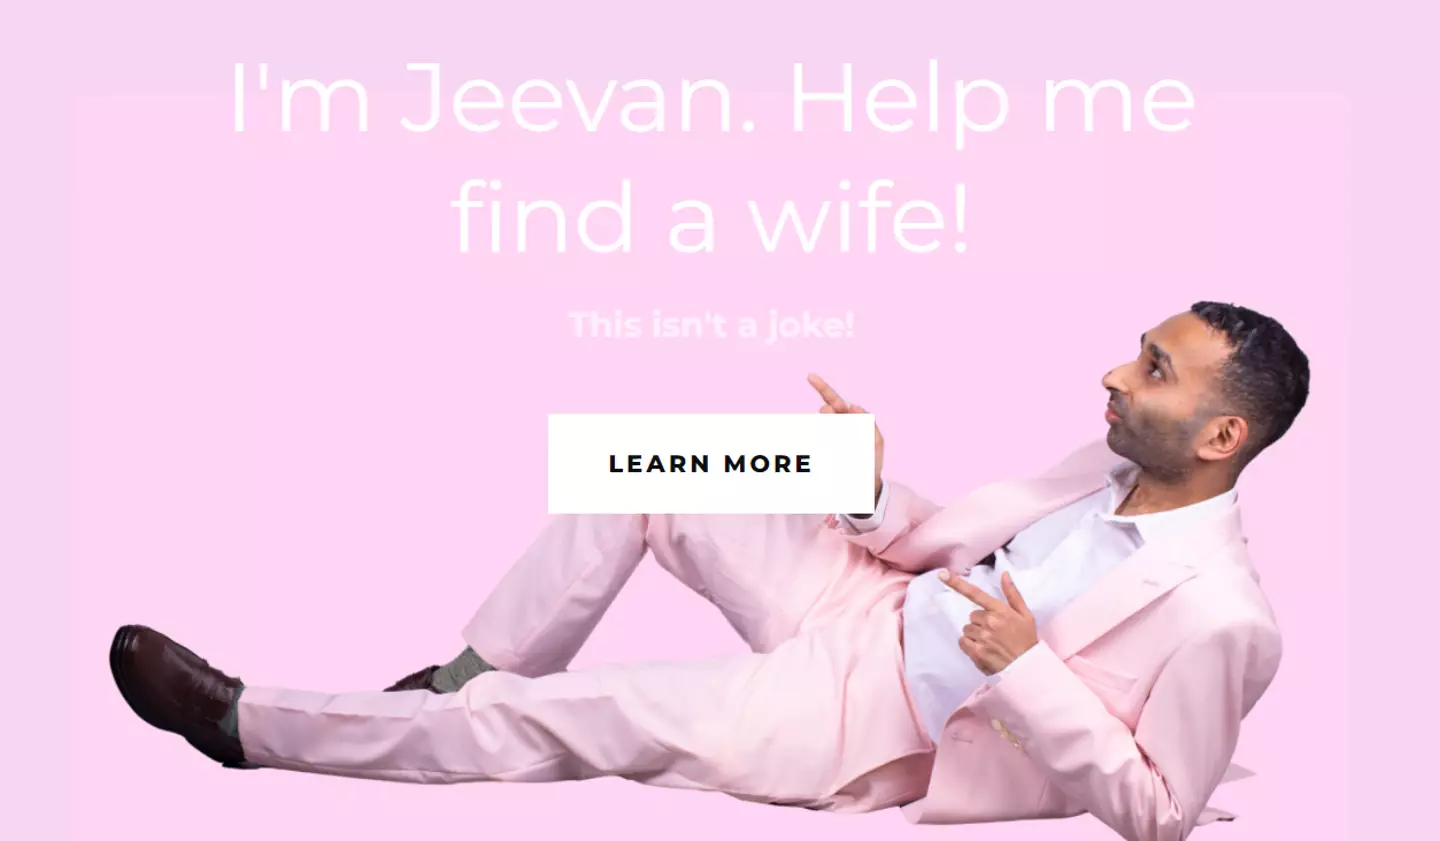 Jeevan Bhachu's website for his campaign to find a wife. (findjeevanawife.com)